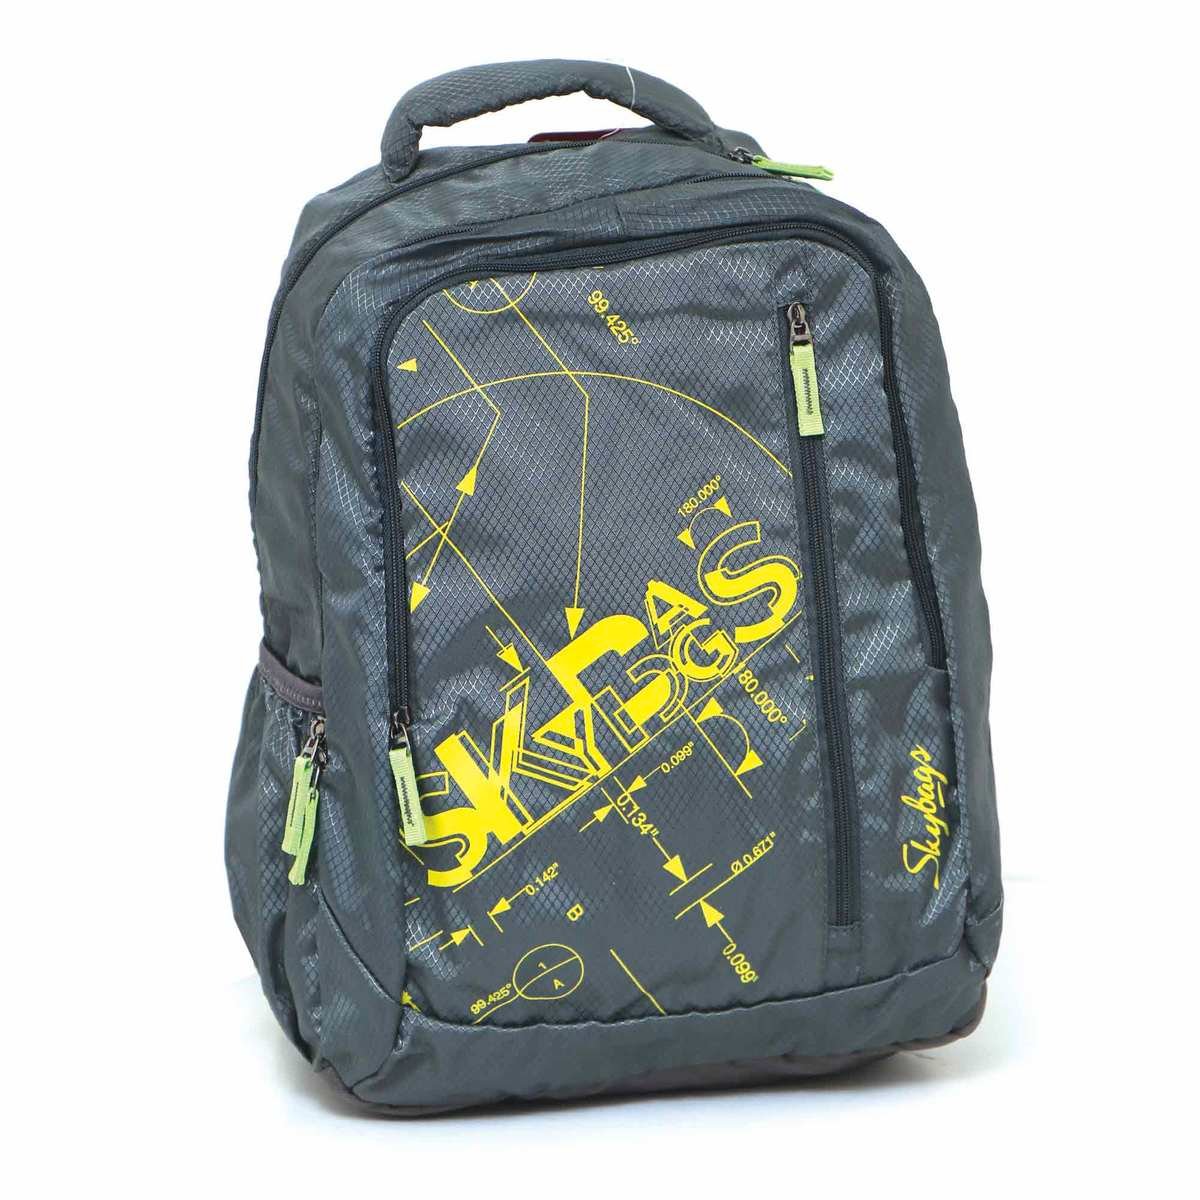 Skybags Backpack 18inch Orio Lite 11 Grey Assorted